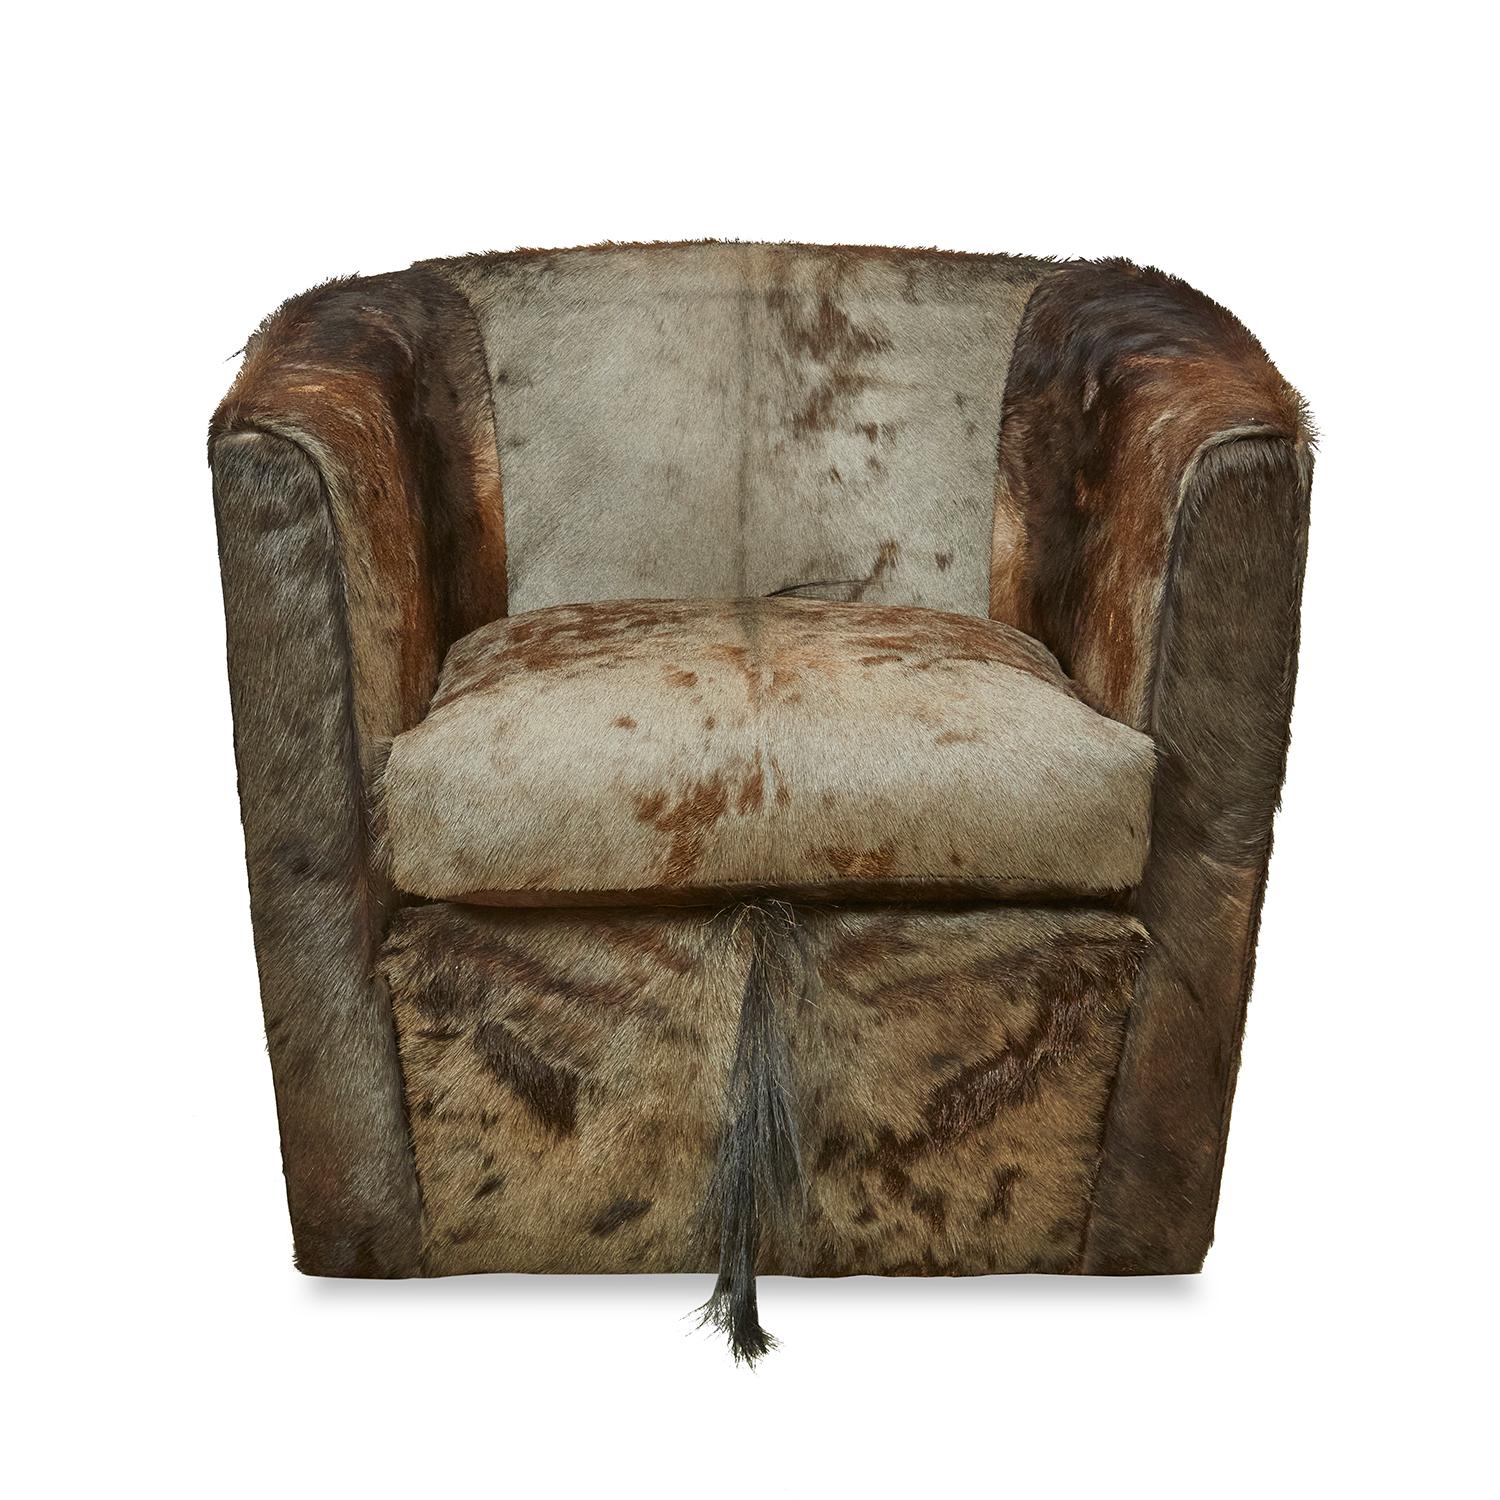 Genuine Blue Wildebeest hide creates an occasional chair sure to make a statement. Each chair requires four full hides to upholster and manufacture making every chair one-of-a-kind. Due to the use of natural materials, each piece is unique and may